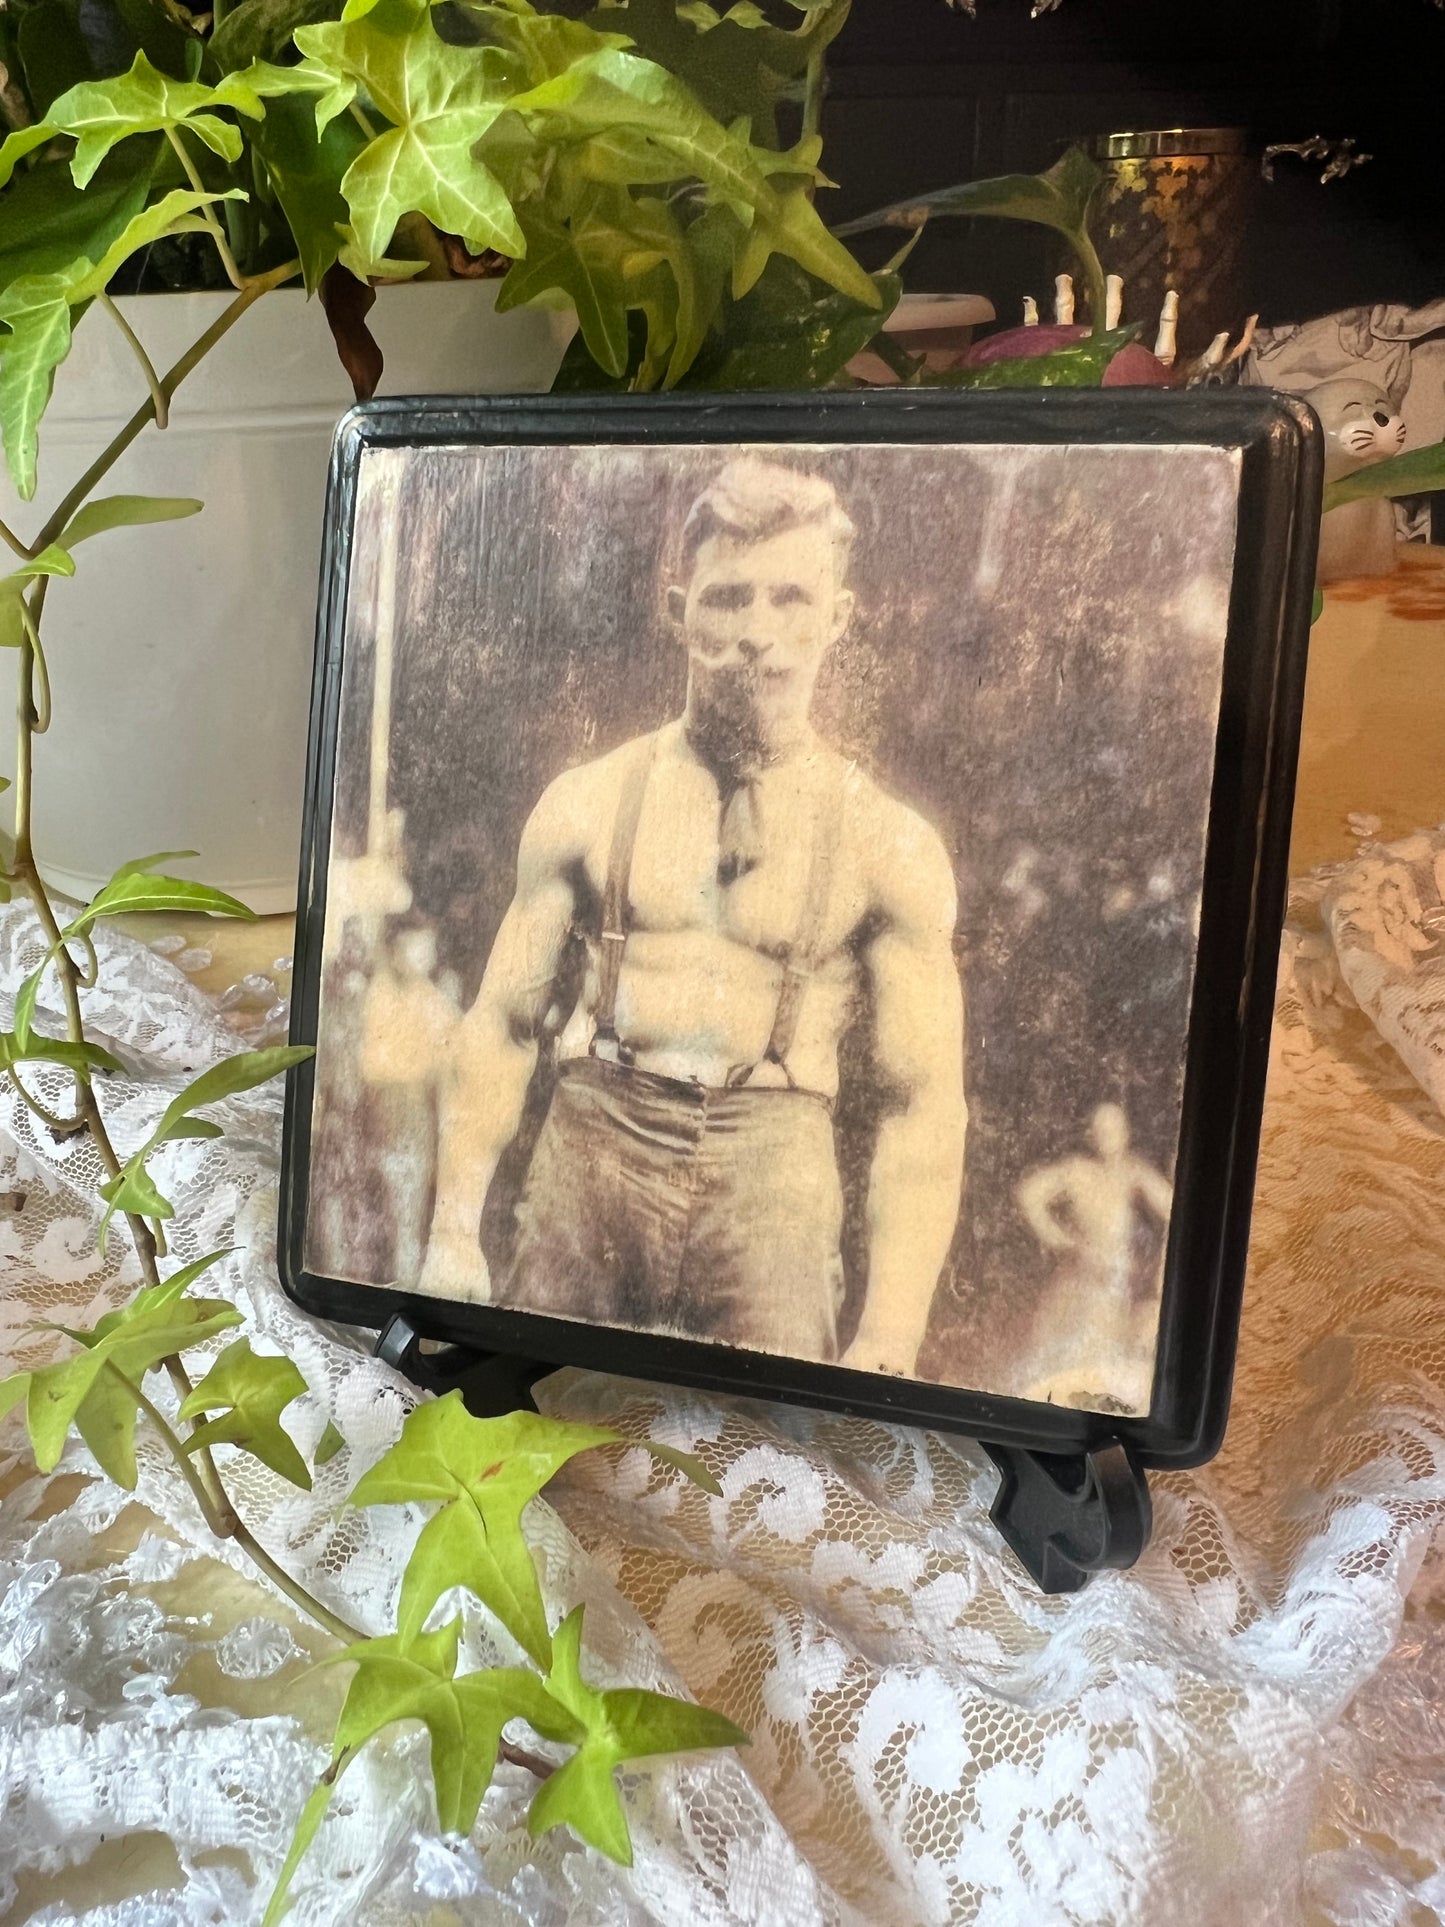 Dark Academia Plaque, Wall Hanging, Tabletop Display, Late 1800's Hunky Guy